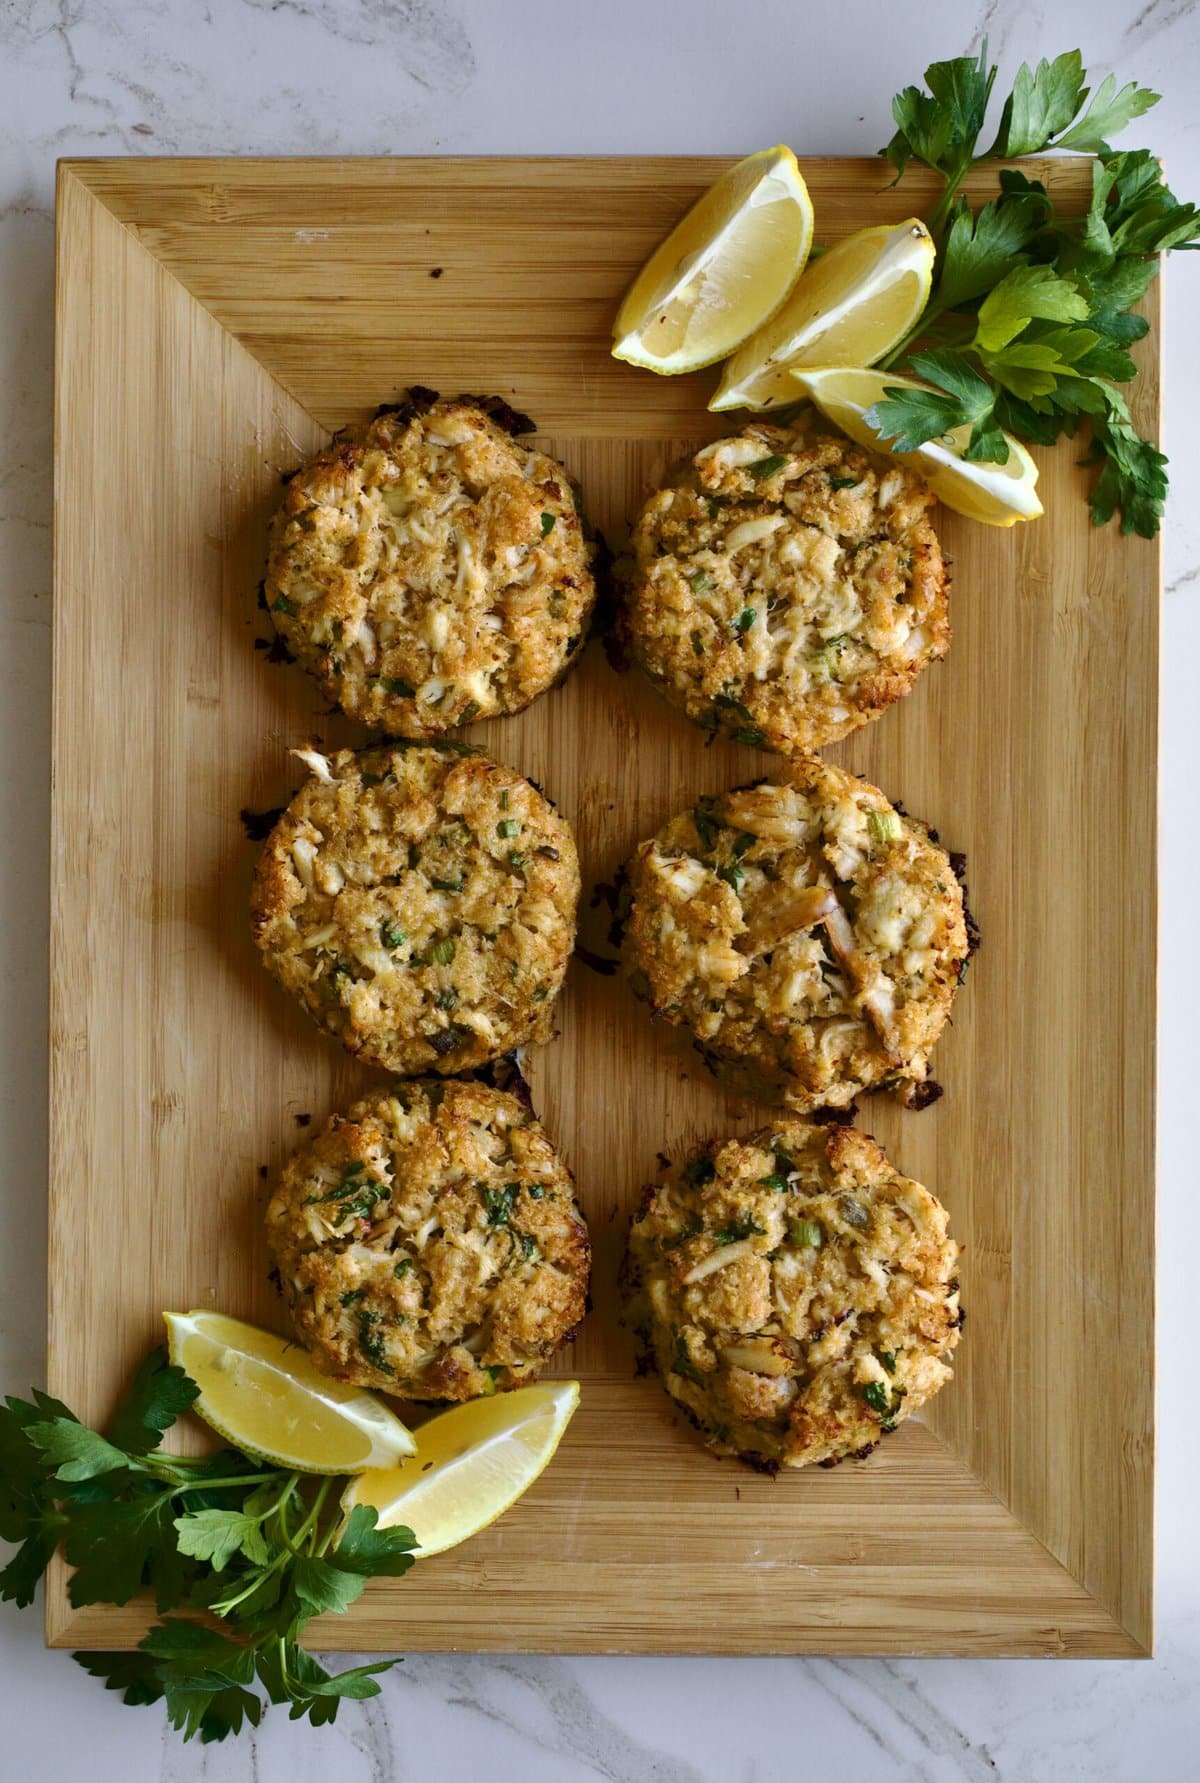 crab cakes displayed on wooden board with lemon and parsley.